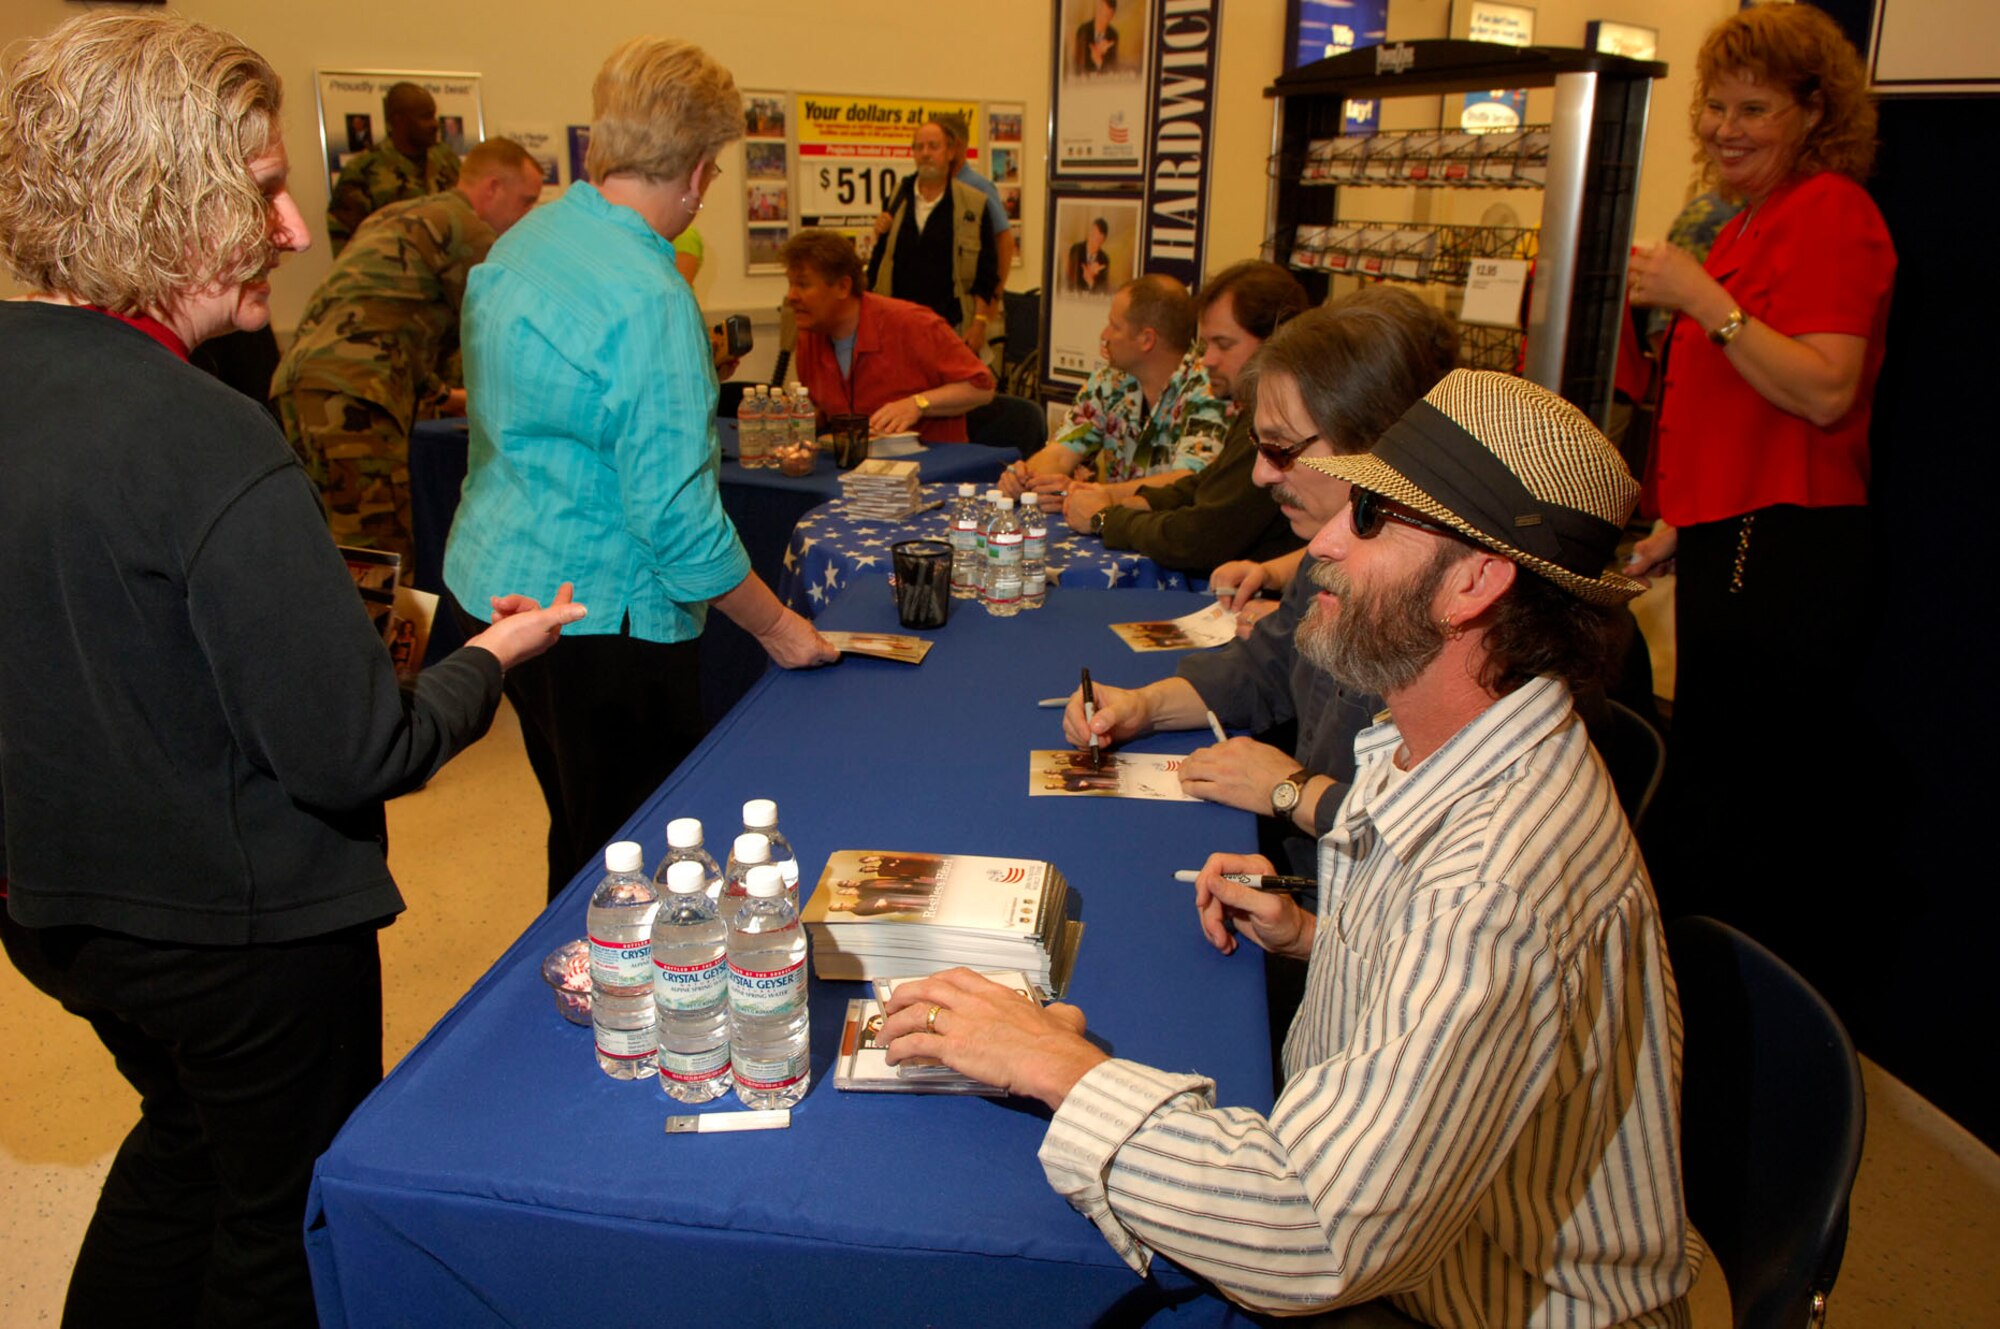 ROBINS Air Force Base, GA -- April 5, 2006 -- Members of the country music group Restless Heart sign autographs and visit with patrons at the Robins AFB Main Exchange.  The group and other guest artists depart today on a 16-day around-the-world tour to visit and perform for troops at eight locations in Europe, the Middle East and the Pacific regions.  (U.S. Air Force Photo/Ken Hackman)